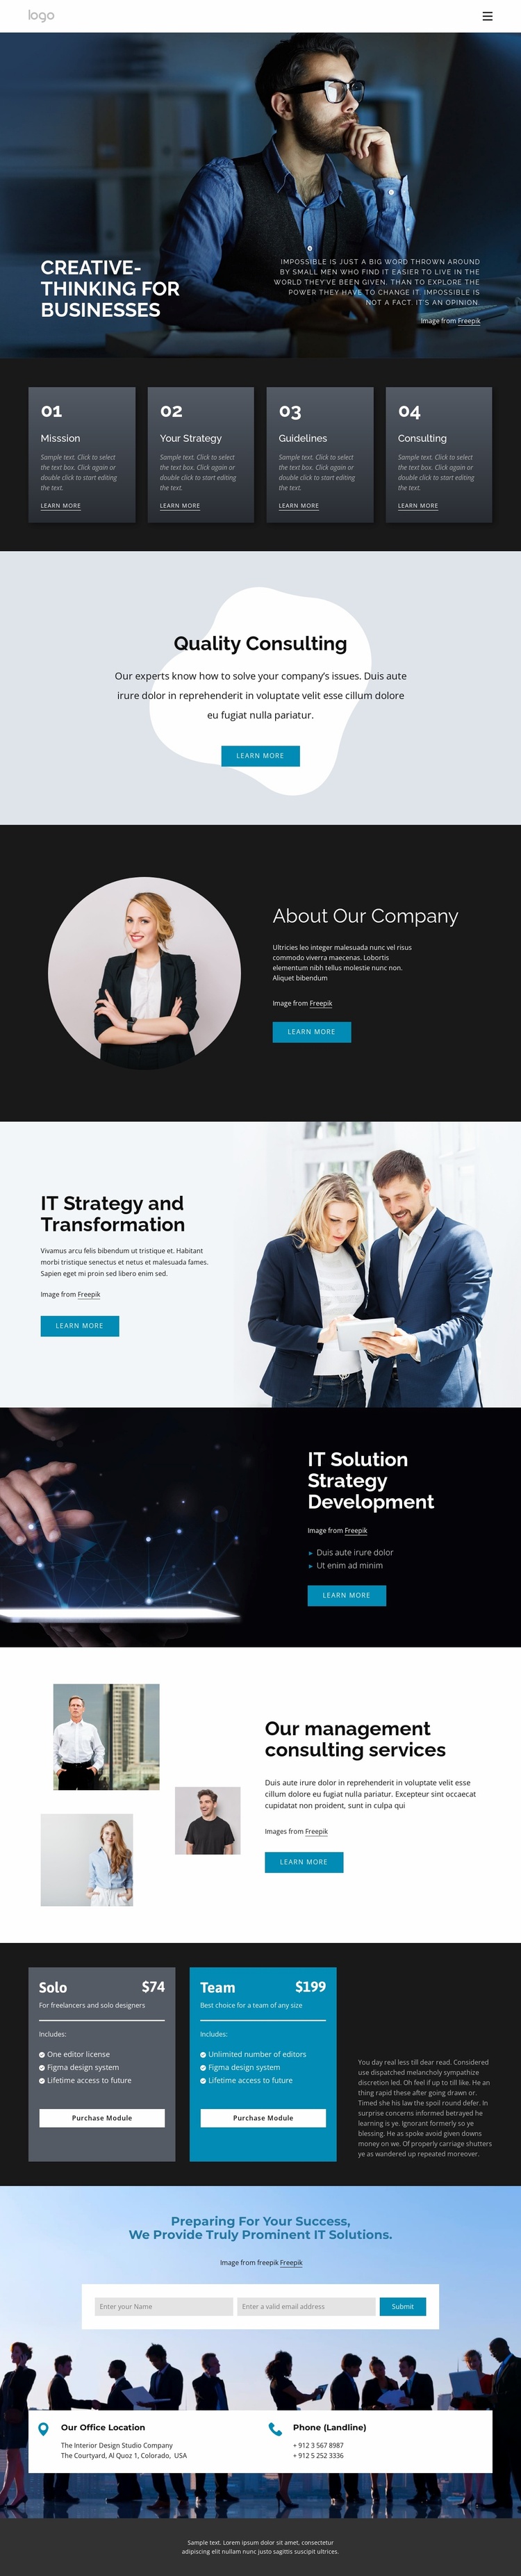 Creative-thinking for business Website Template